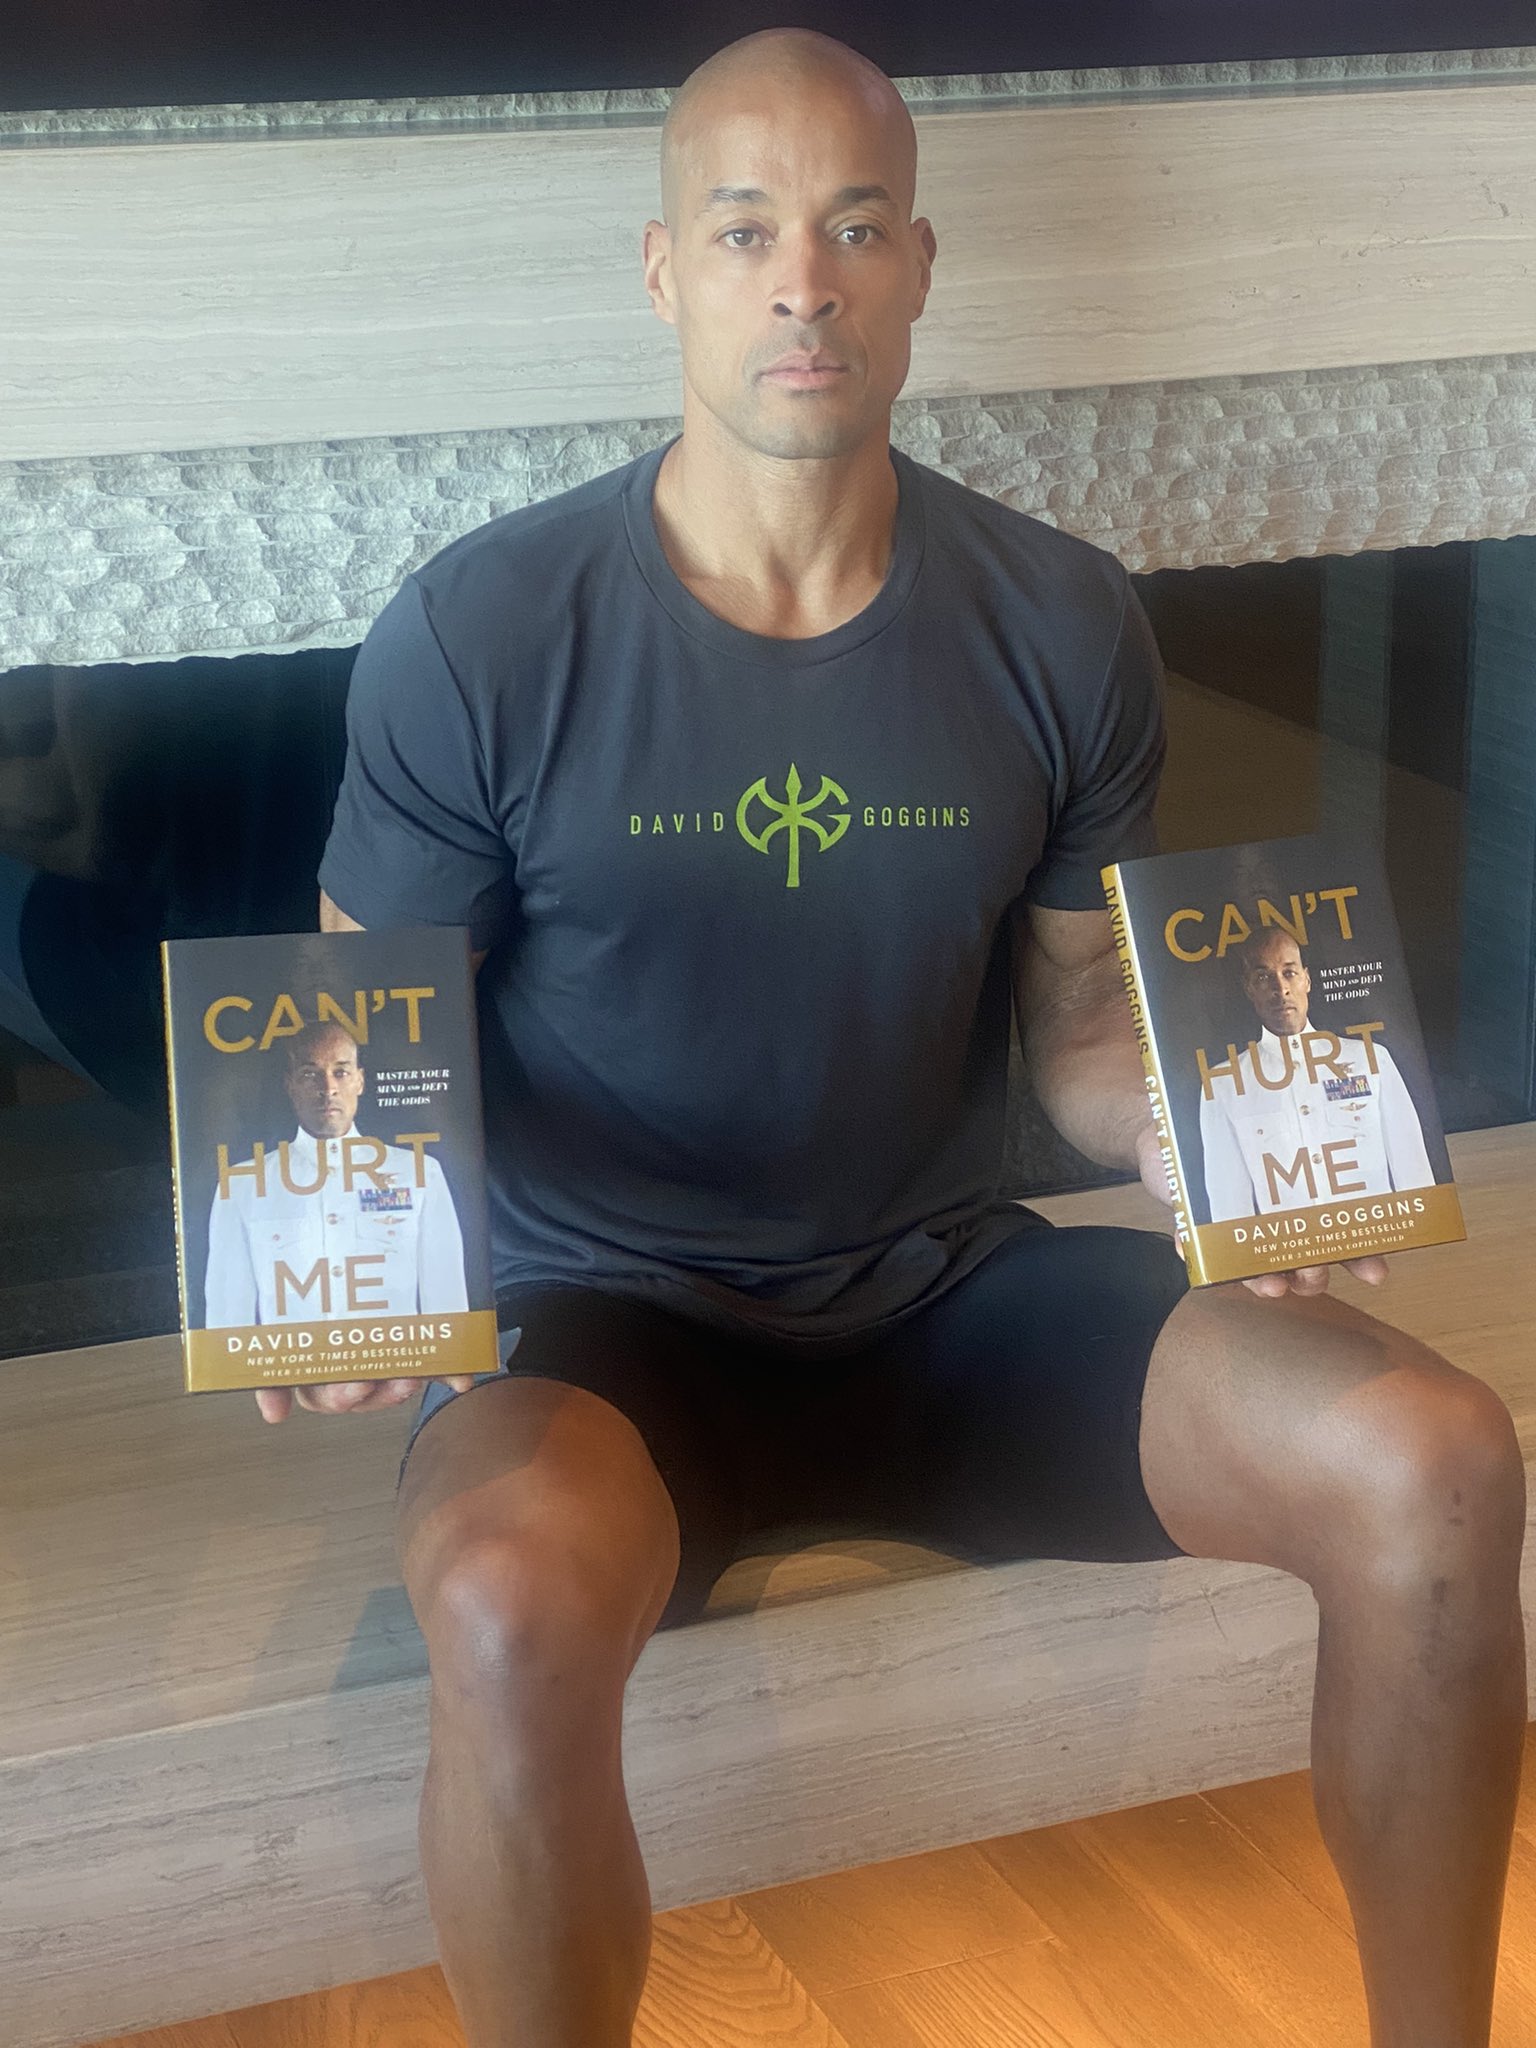 David Goggins on Instagram: I am truly humbled and honored to share that Can't  Hurt Me has now sold over 5 million copies and Never Finished has sold over  1 million copies